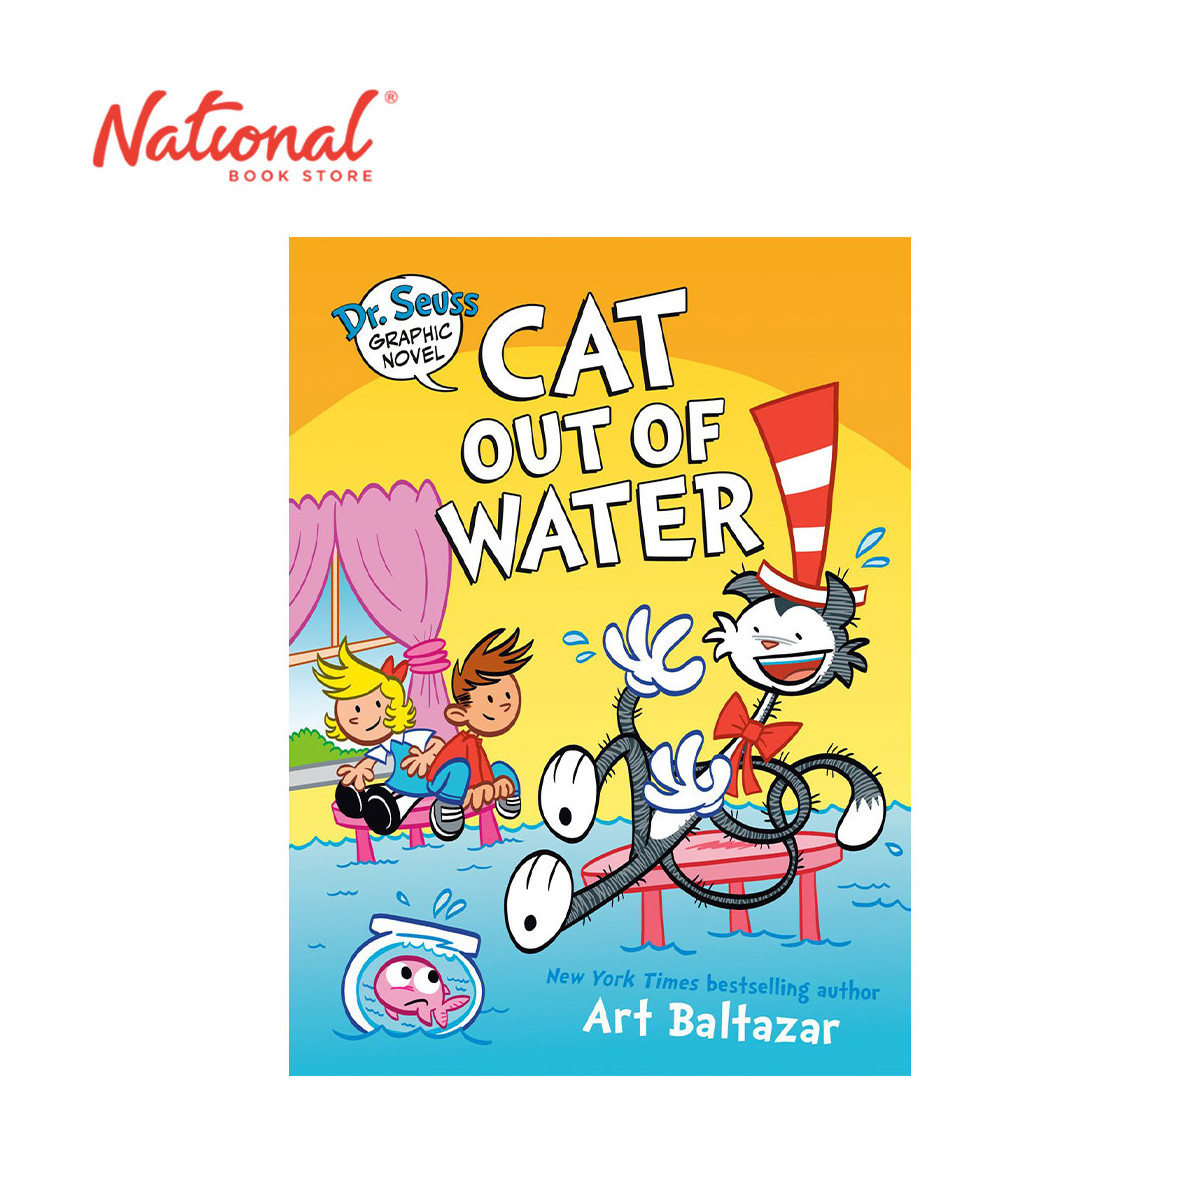 *PRE-ORDER* Dr. Seuss Graphic Novel: Cat Out Of Water: A Cat In The Hat Story by Art Baltazar - Hardcover - Children's Comics